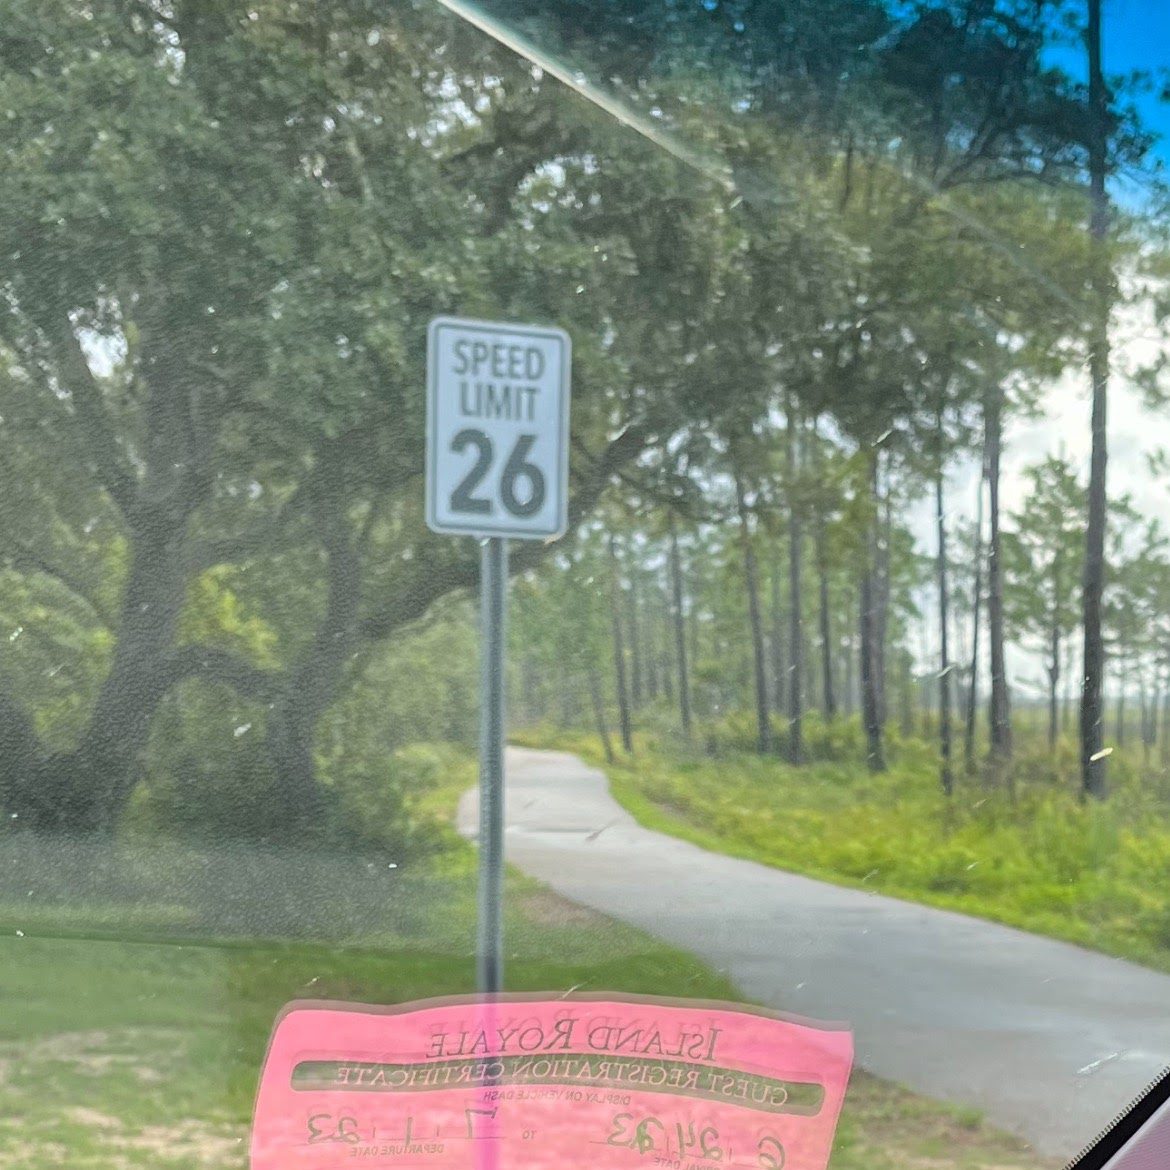 interesting speed limit sign found on vacation